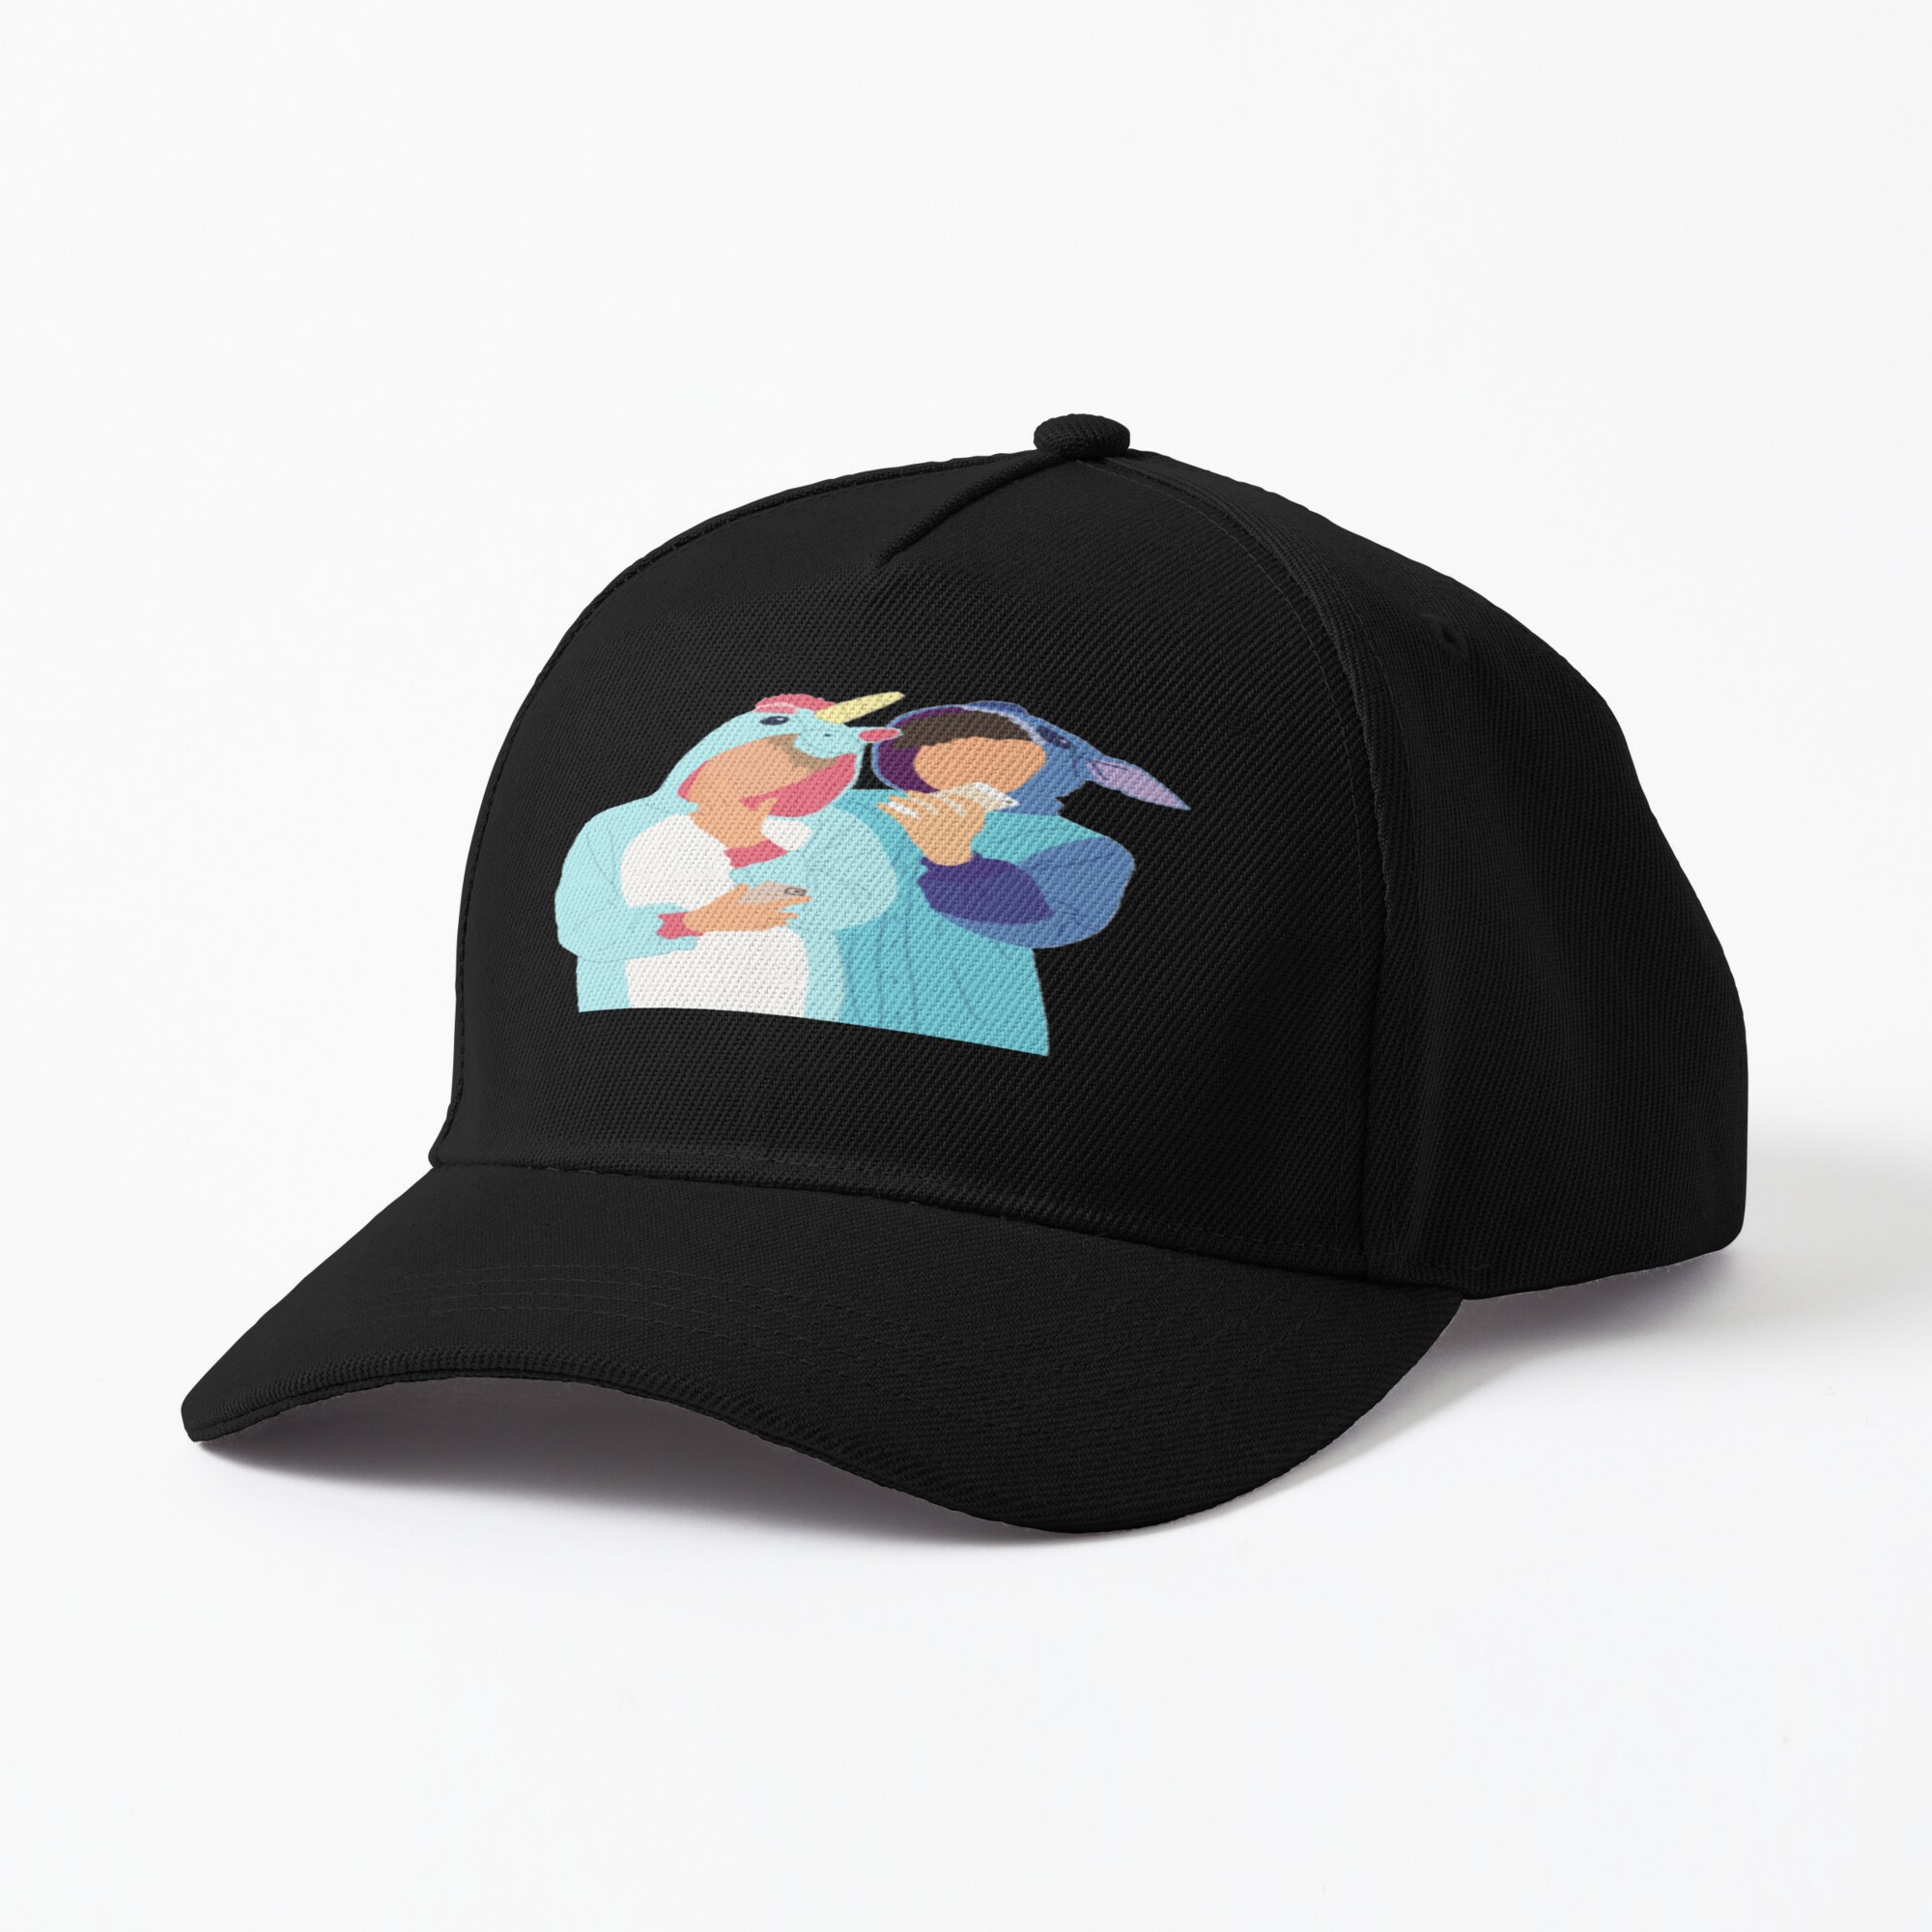 ssrcobaseball capproduct00000044f0b734a5front three quartersquare2000x2000 bgf8f8f8 8 - Sam And Colby Merch